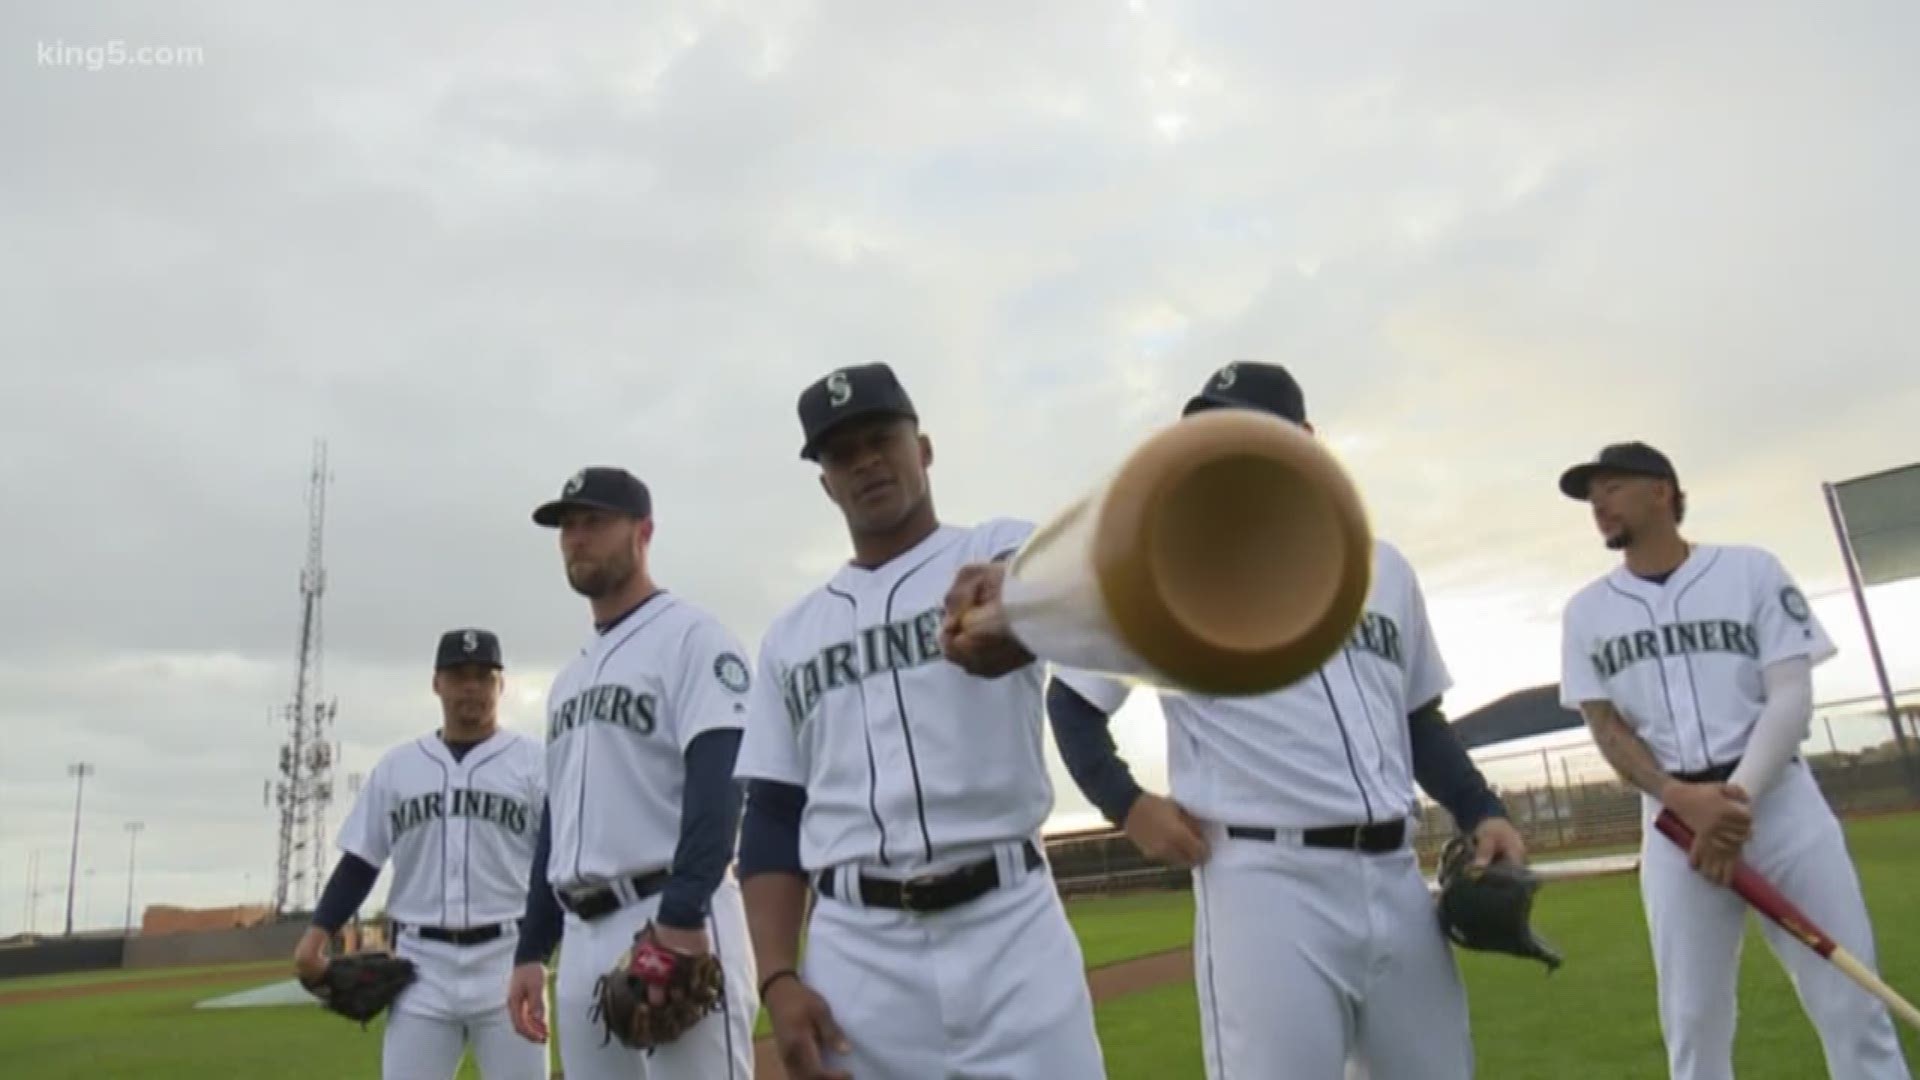 The Mariners have arrived safely in Japan. Centerfielder Mallex Smith stayed home, recovering from an elbow injury. He could be ready when the M's come back from Japan. KING 5's Chris Egan has more on the M's new centerfielder.